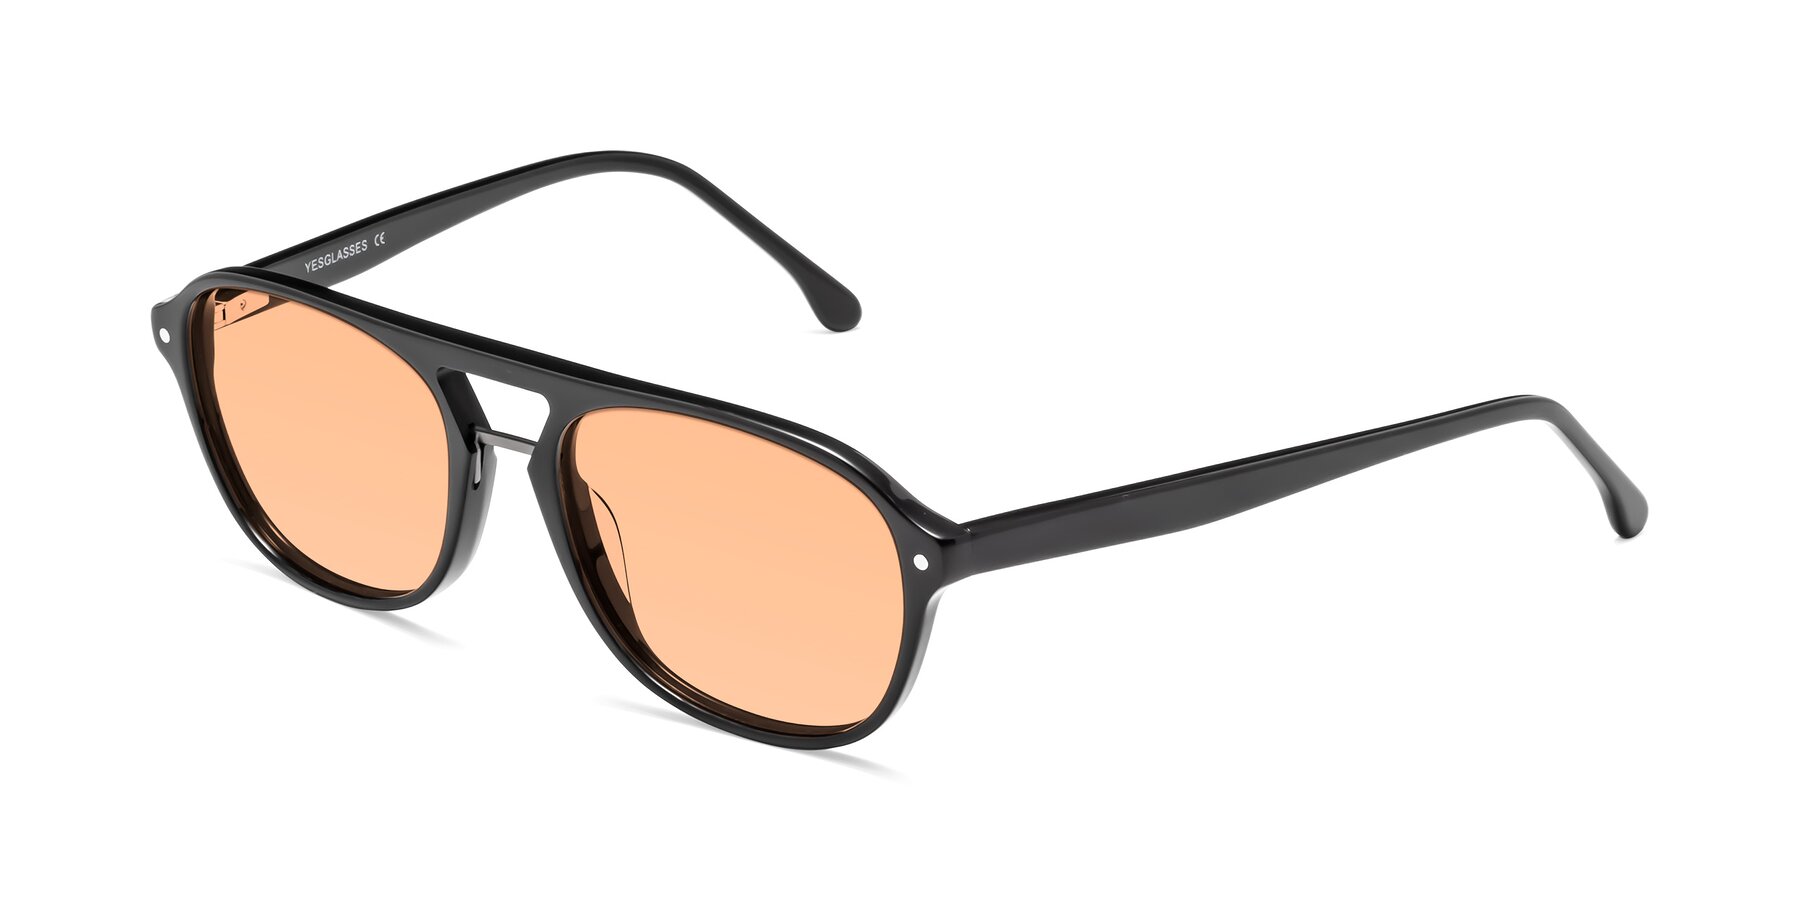 Angle of 17416 in Black with Light Orange Tinted Lenses